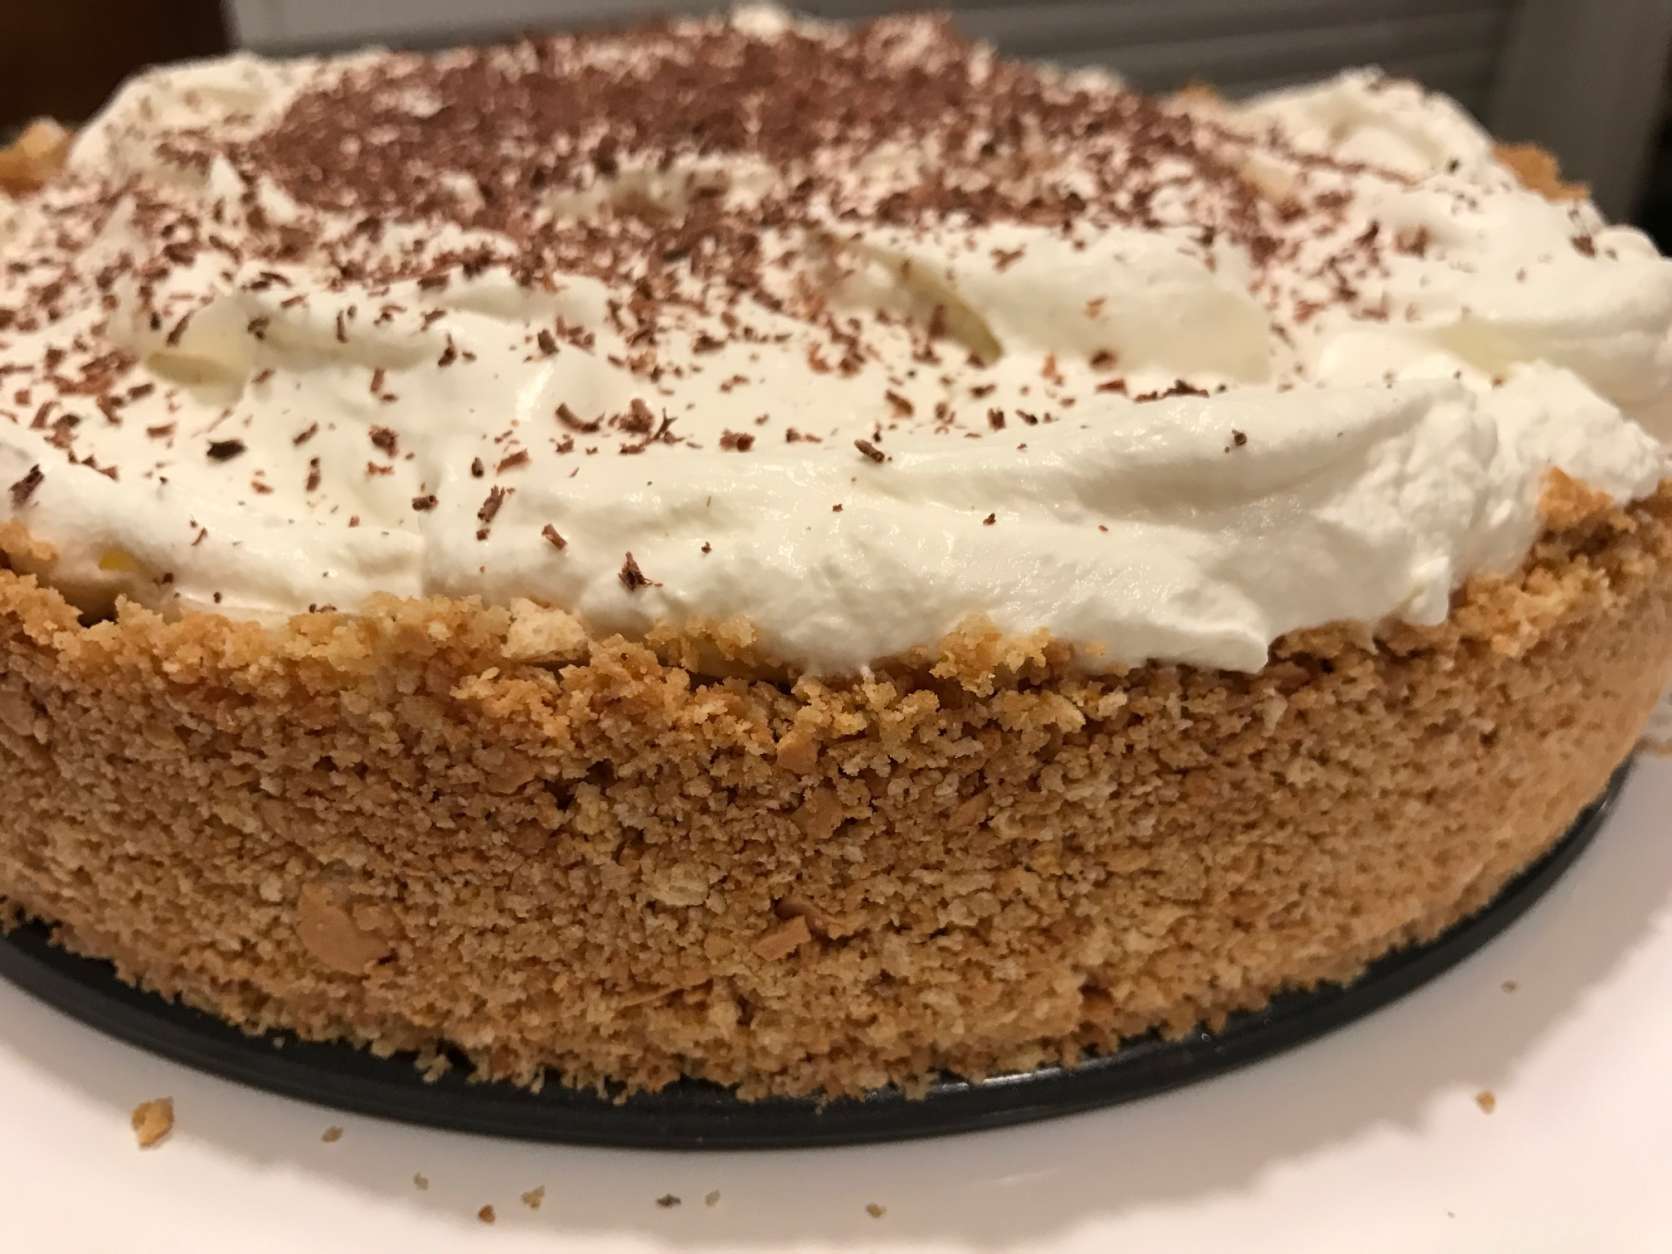 Banoffee pie is made using crumbled digestive biscuits and butter for the base. Bananas, sticky toffee and whipped cream are layered on top. (WTOP/Rachel Nania) 